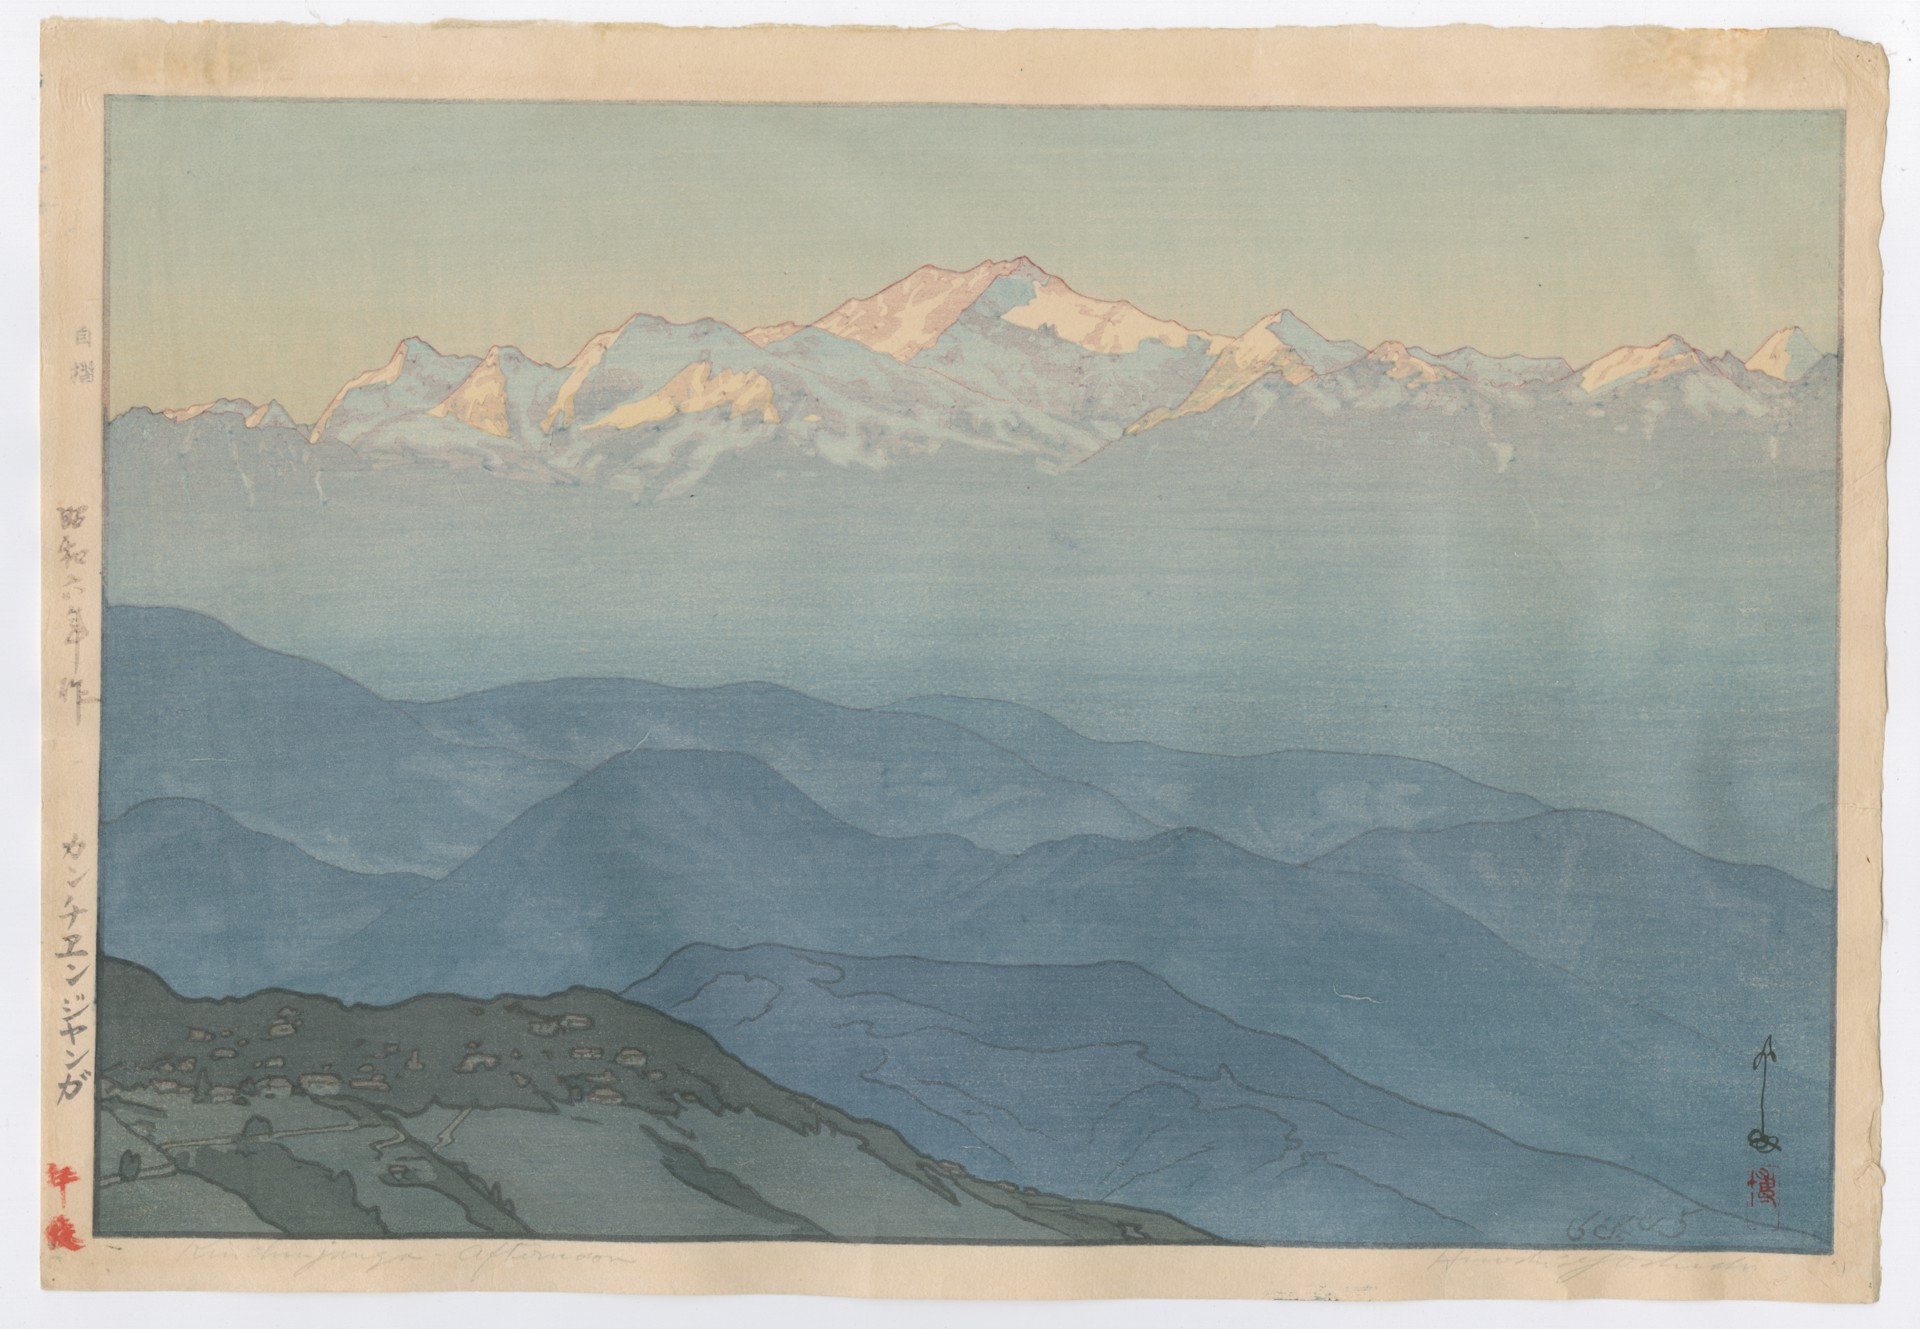 Kanchenjunga in the Afternoon India and Southeast Asia by Hiroshi Yoshida